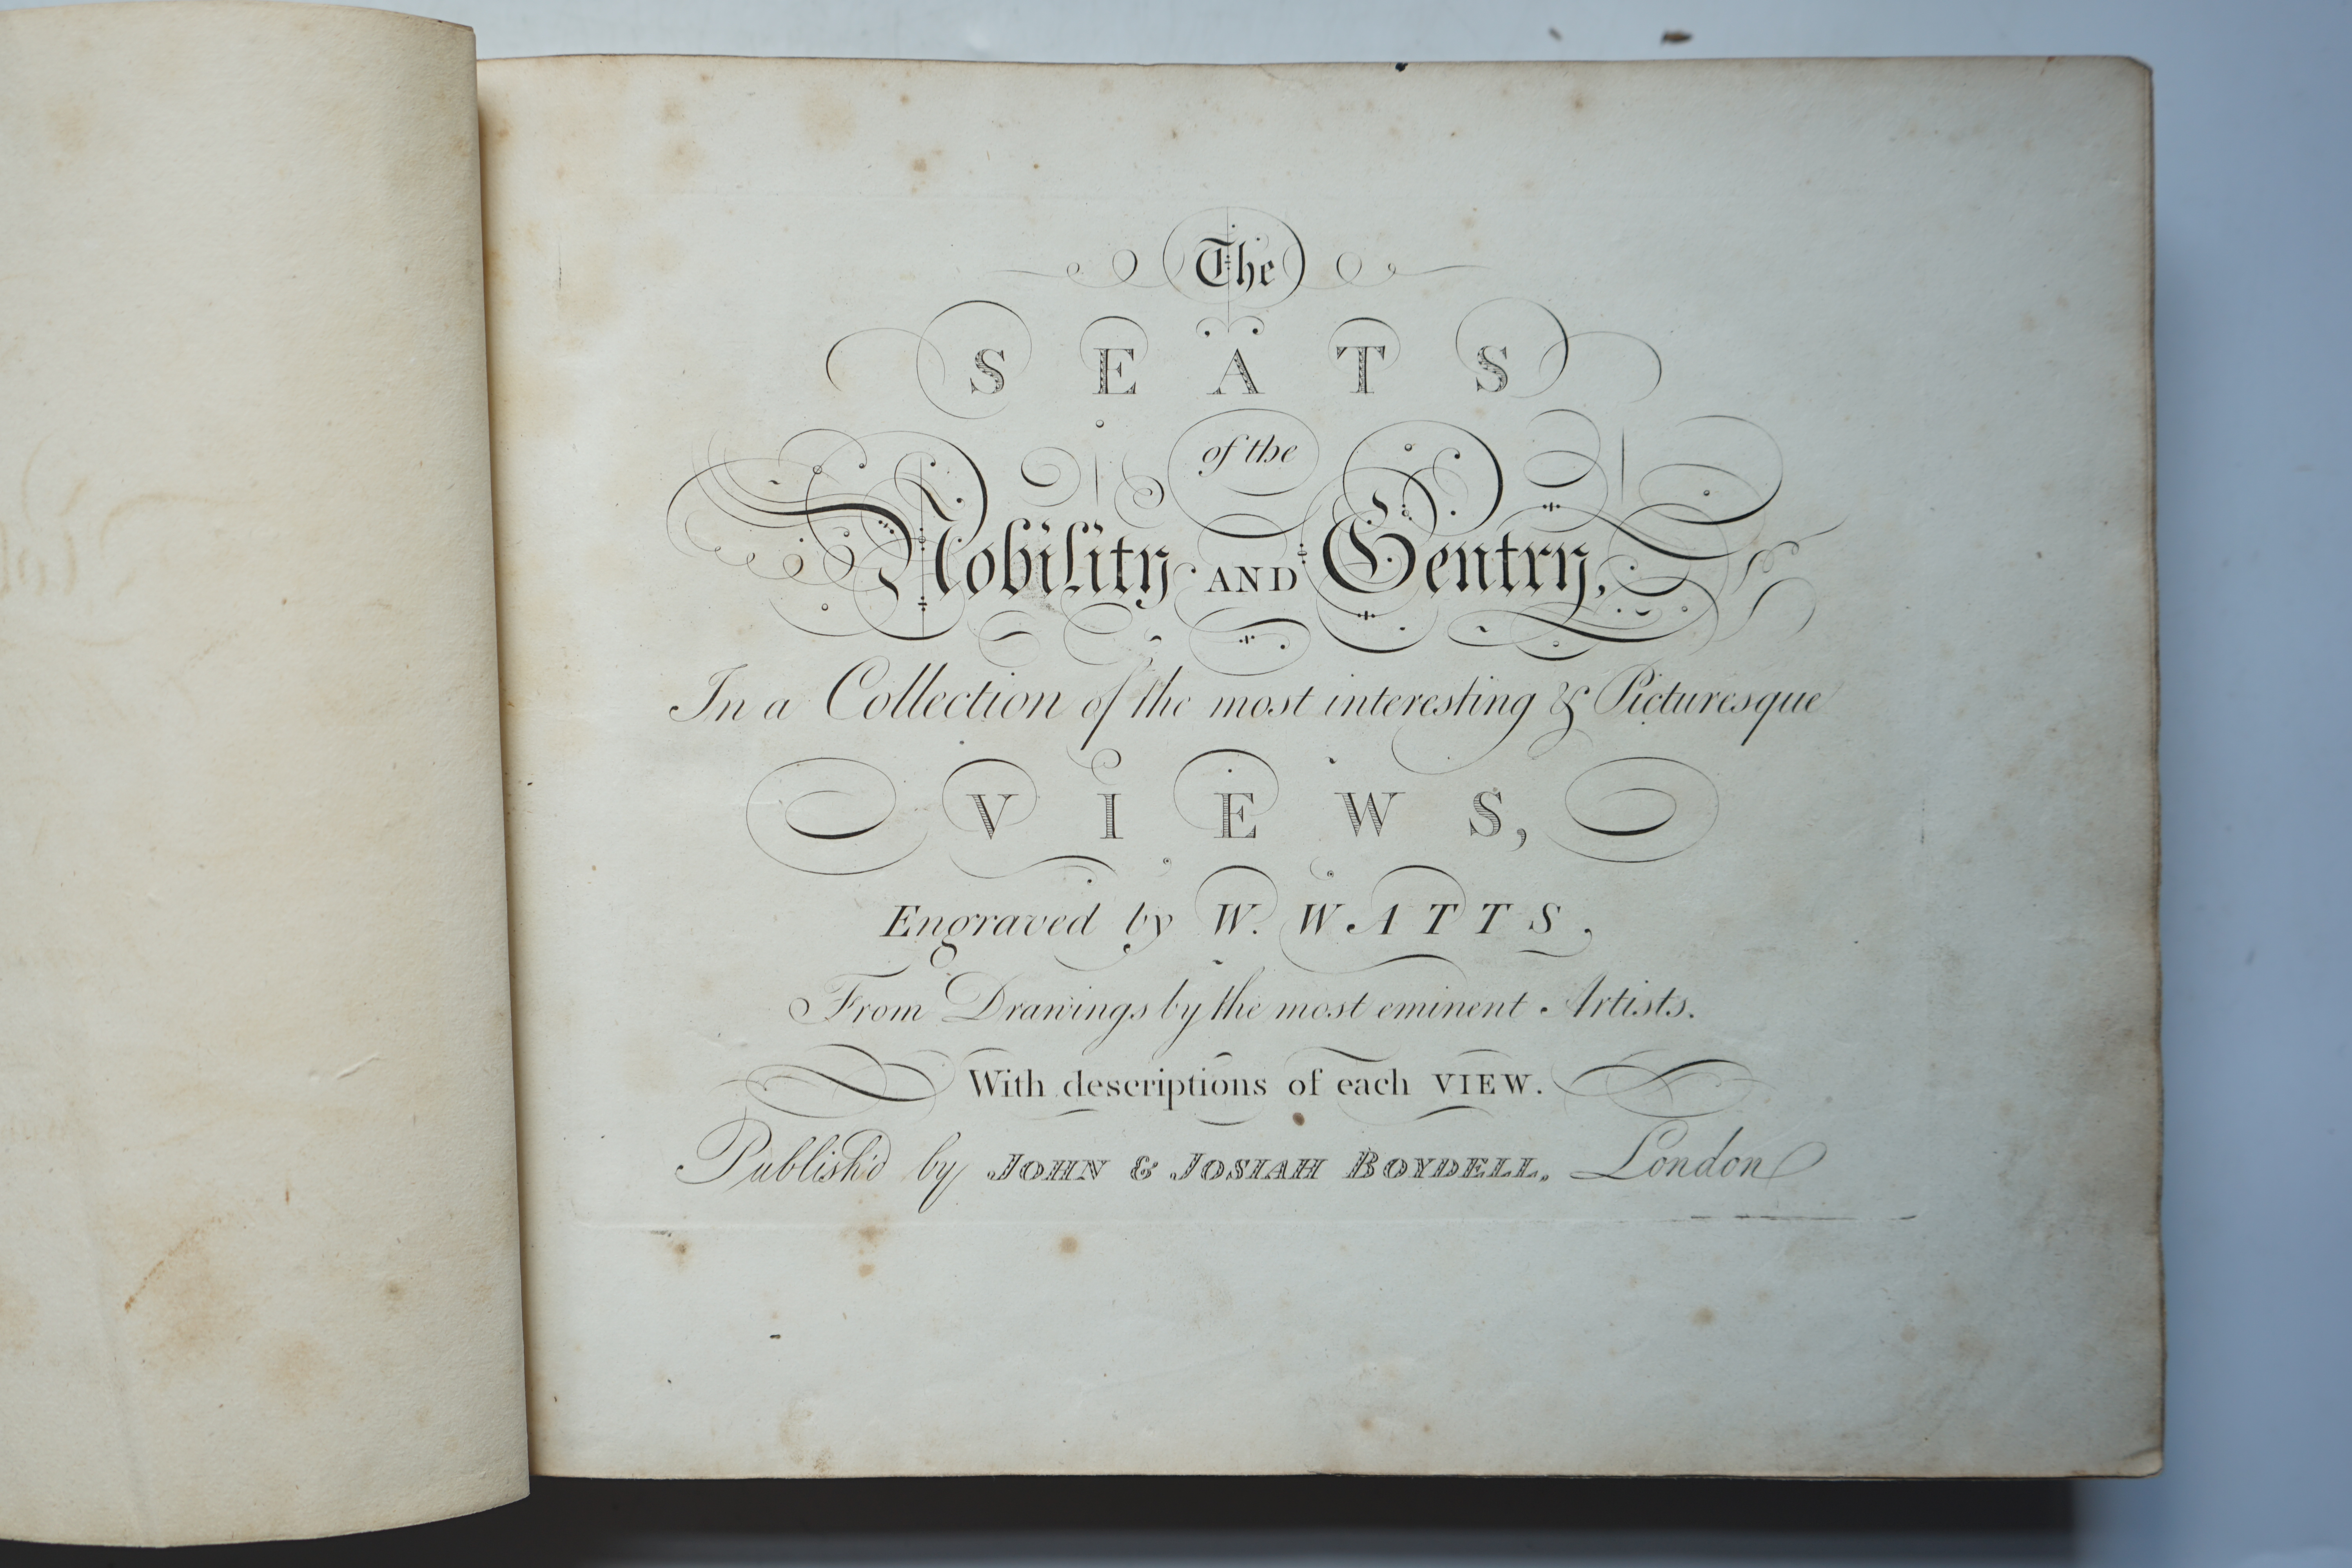 Watts, William - The Seats of the Nobility and Gentry, in a Collection of the Most Interesting and Picturesque Views, engraved title and 84 engraved plates by William Watts, after Sandby, Nates, Dalby & co., each with an